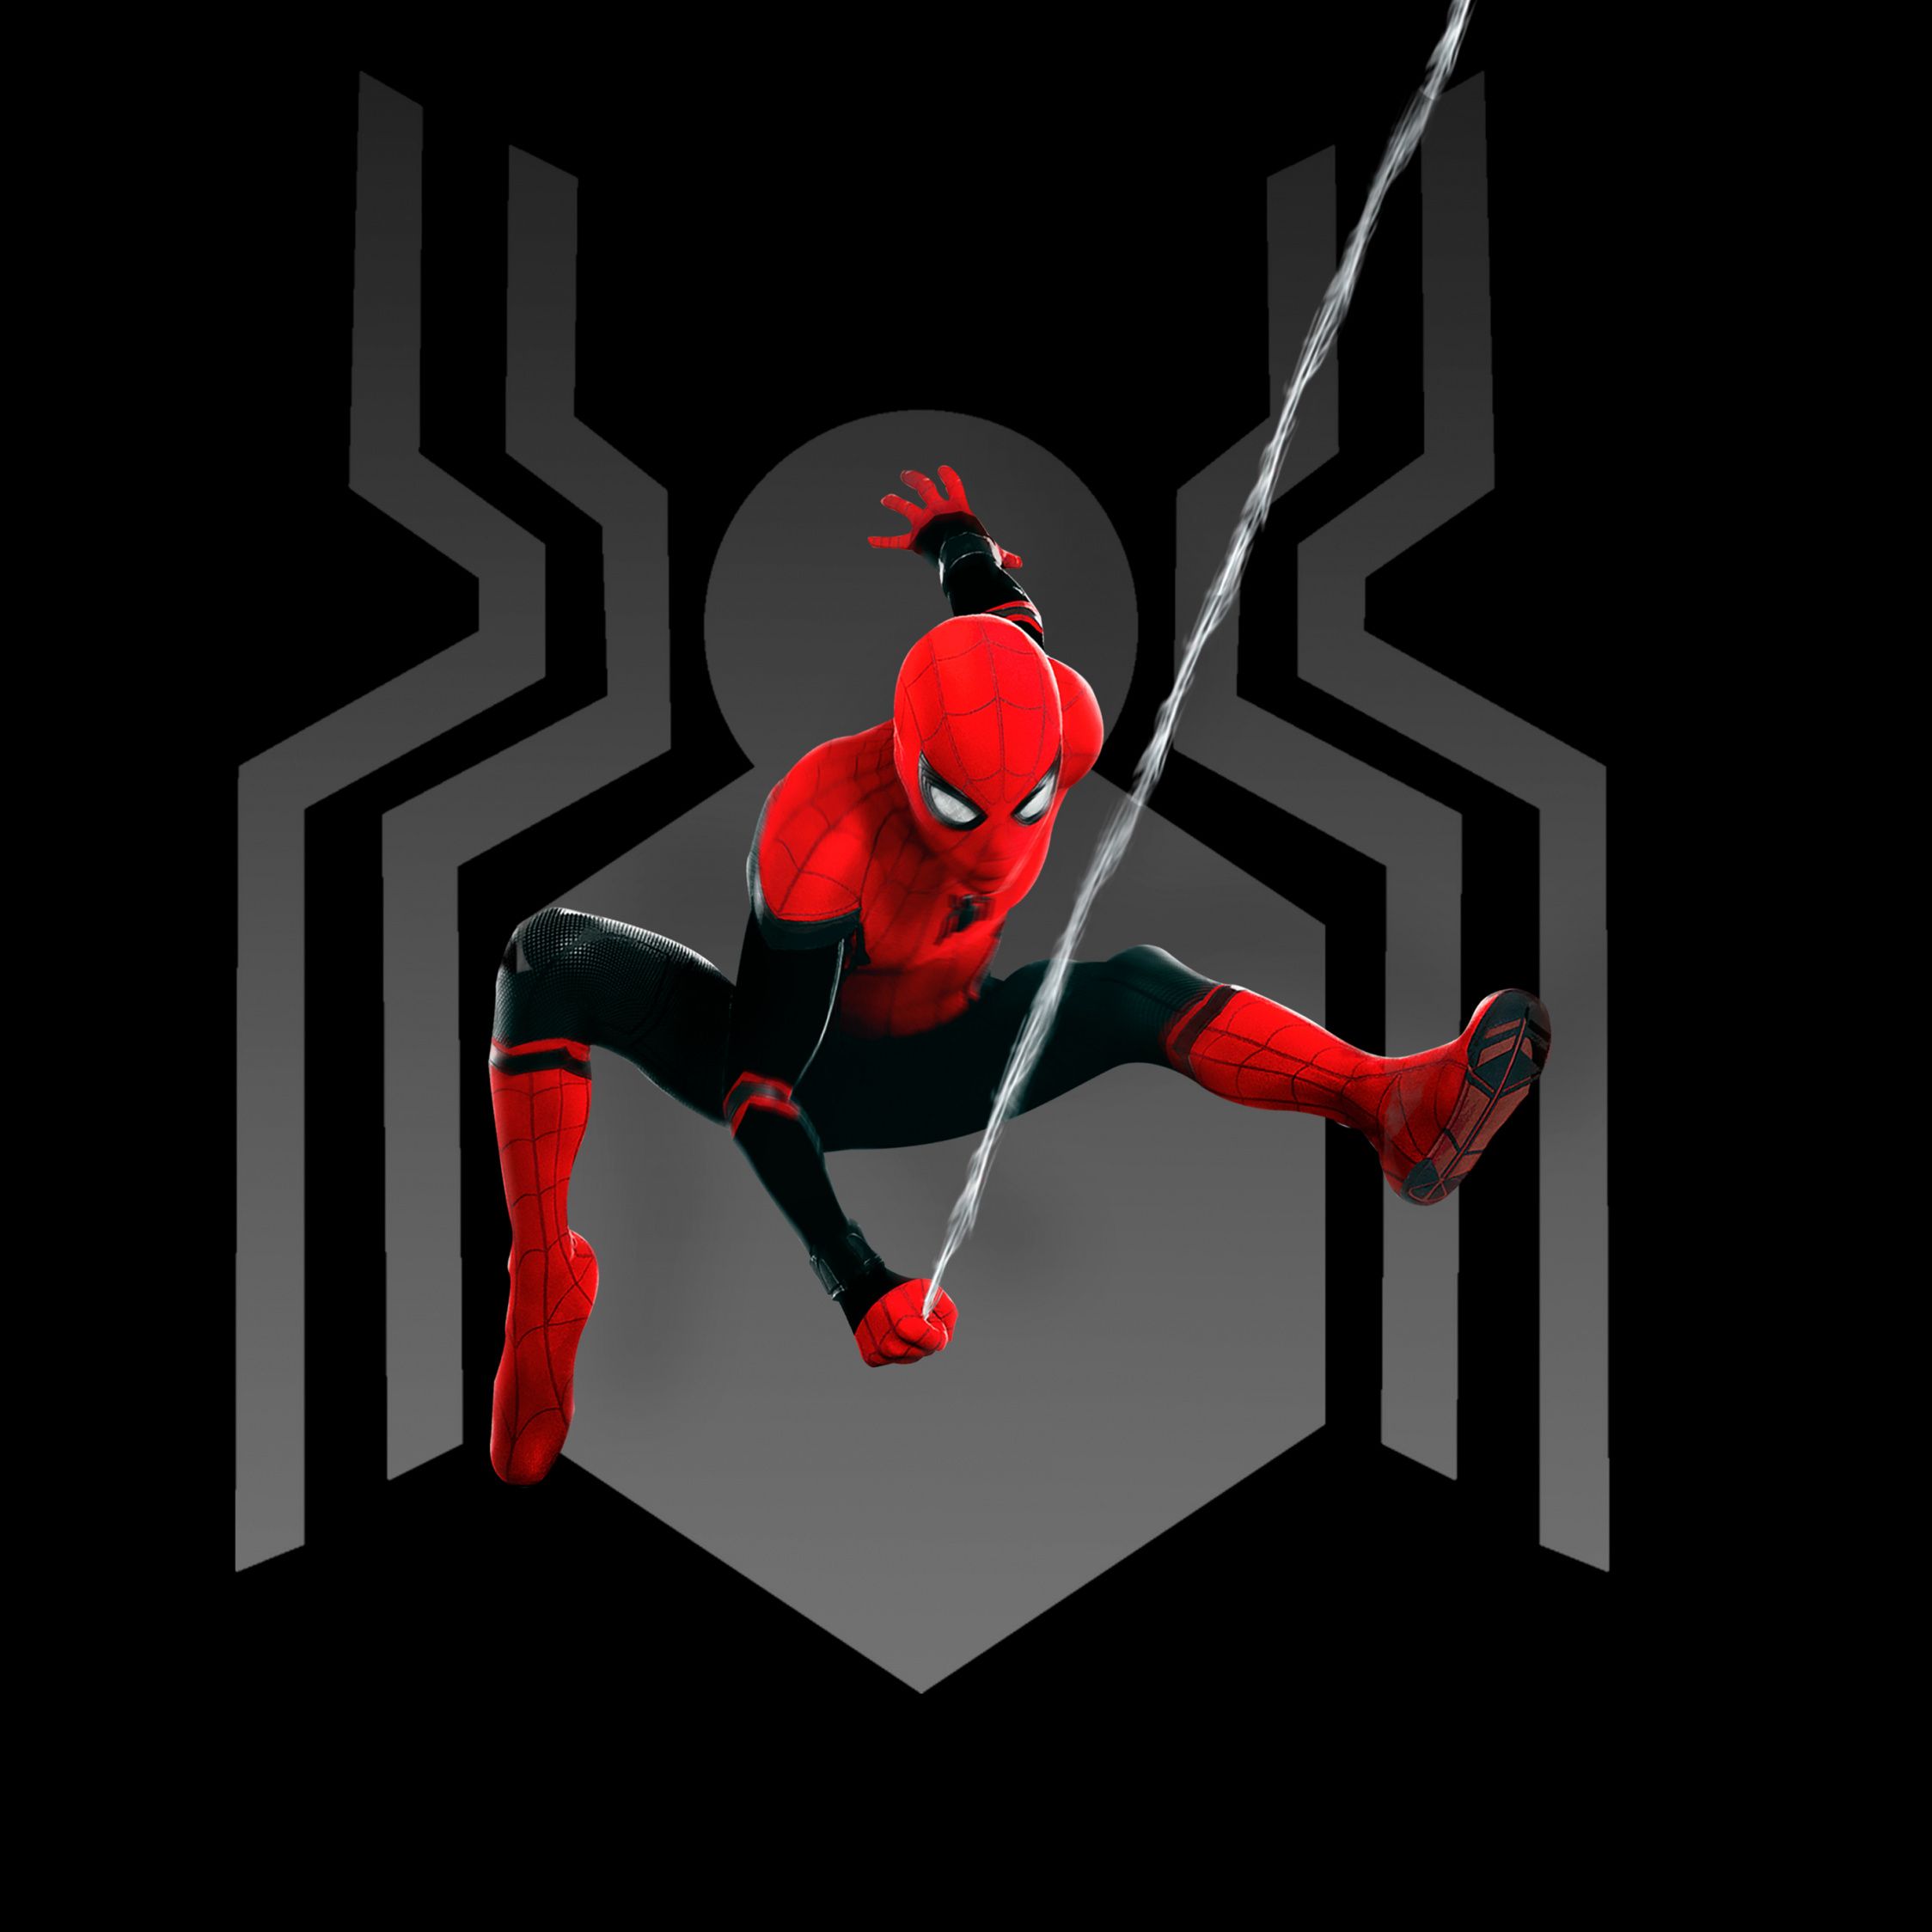 Download Spider Man: Far From Home, 2019 Wallpaper, 2248x IPad Air, IPad Air IPad IPad IPad Mini IPad Mini 3